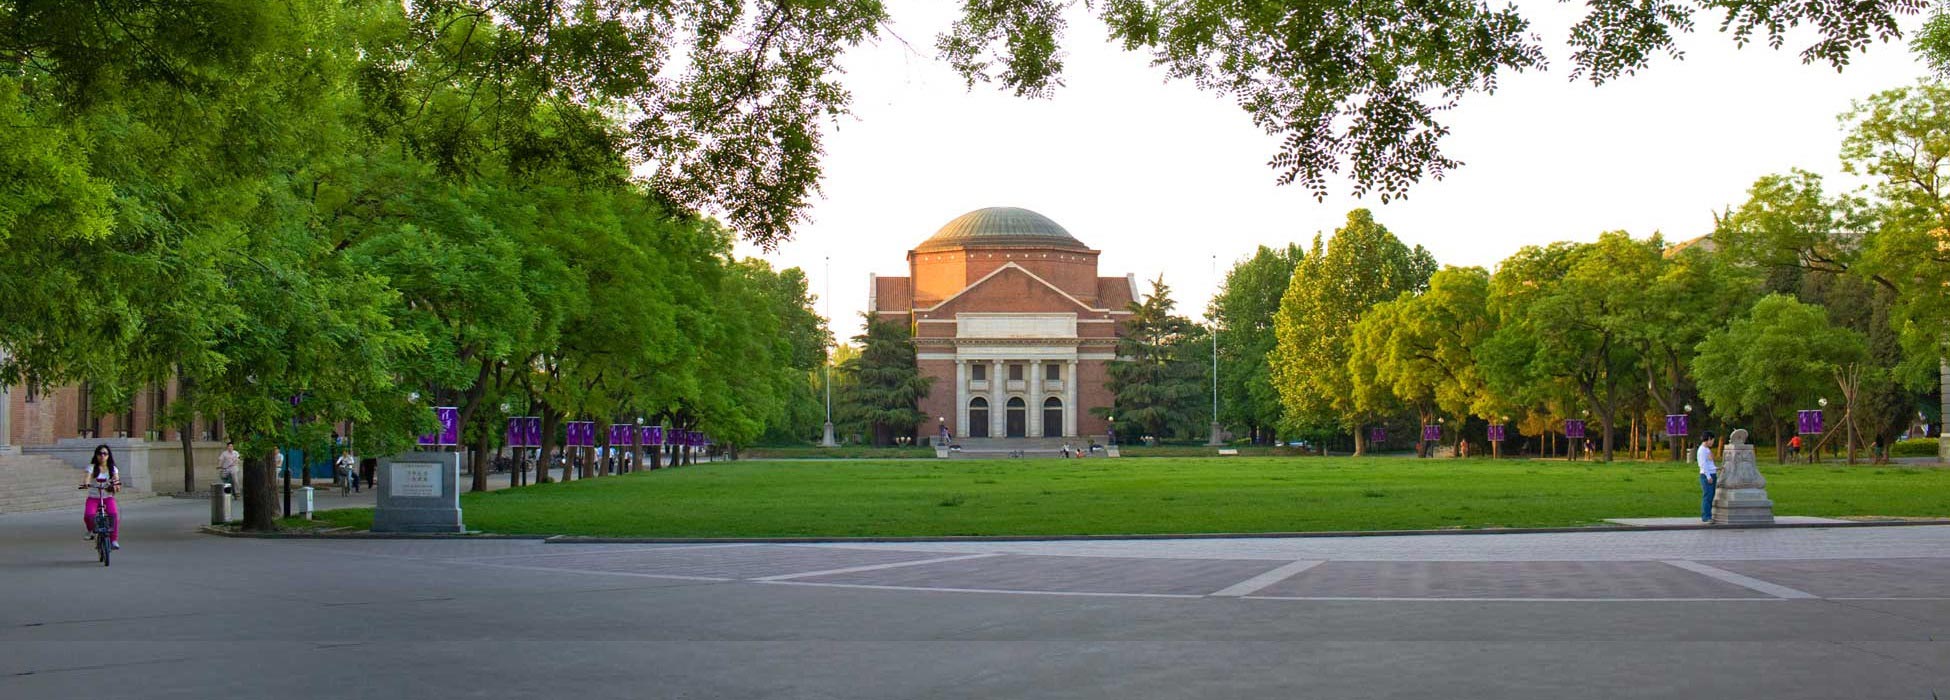 Is Tsinghua University the best in China?